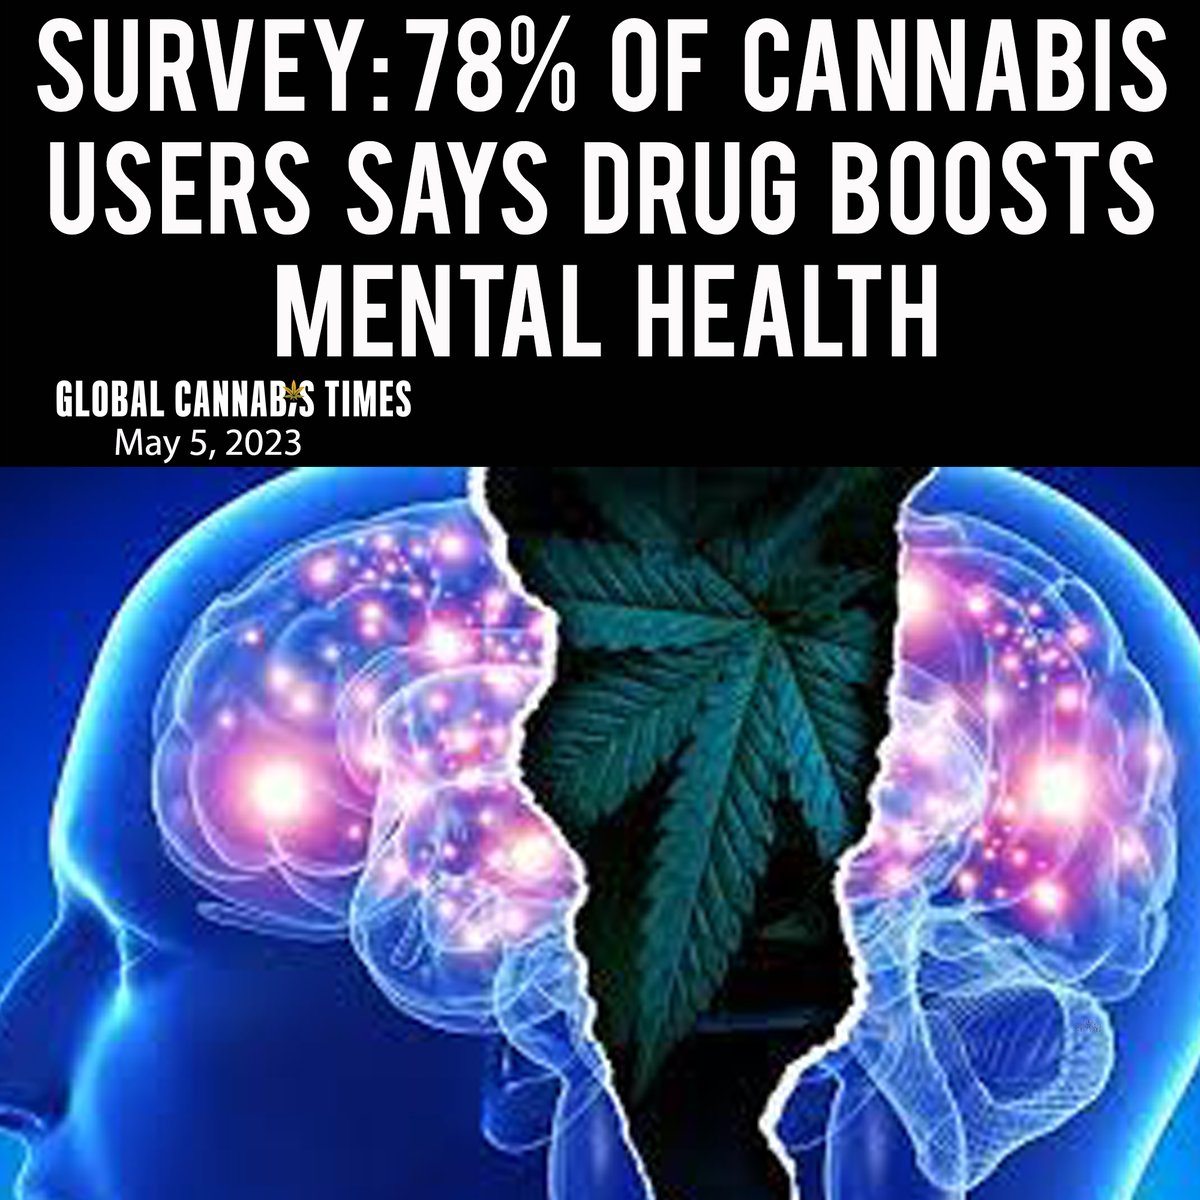 NEWS You Might Have Missed 

@cannabiscommunitycollege  
@goodweedco @thecannabiscutie @the_lodge_cannabis #cannabiscommunity #420 #mmj #cannabiseducation #cannabislife #weedlife #usamentalhealth #mentalhealthawareness #mentalhealth #mentalhealthsupport #mentalhealthsupport